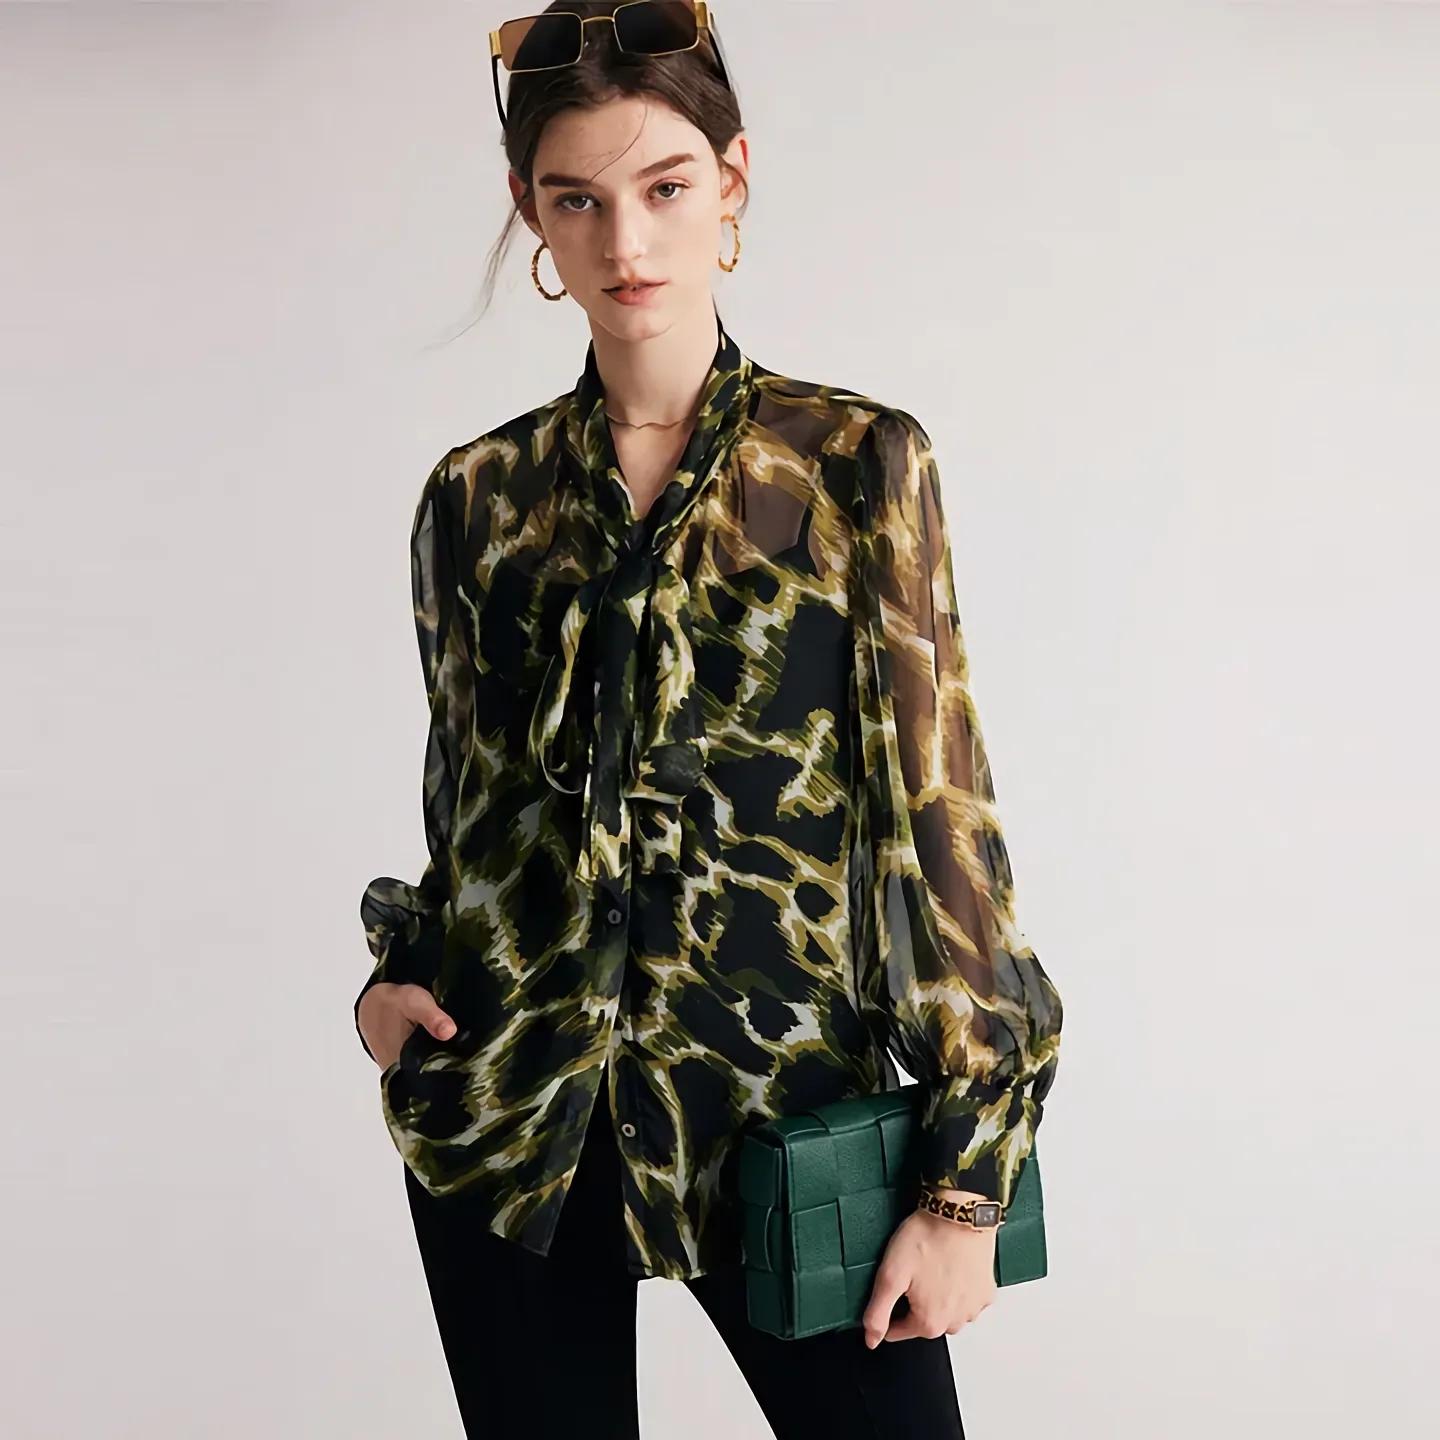 Crepe Silk Blouse Shirt Printed Green Bow-tie For Women REAL SILK LIFE